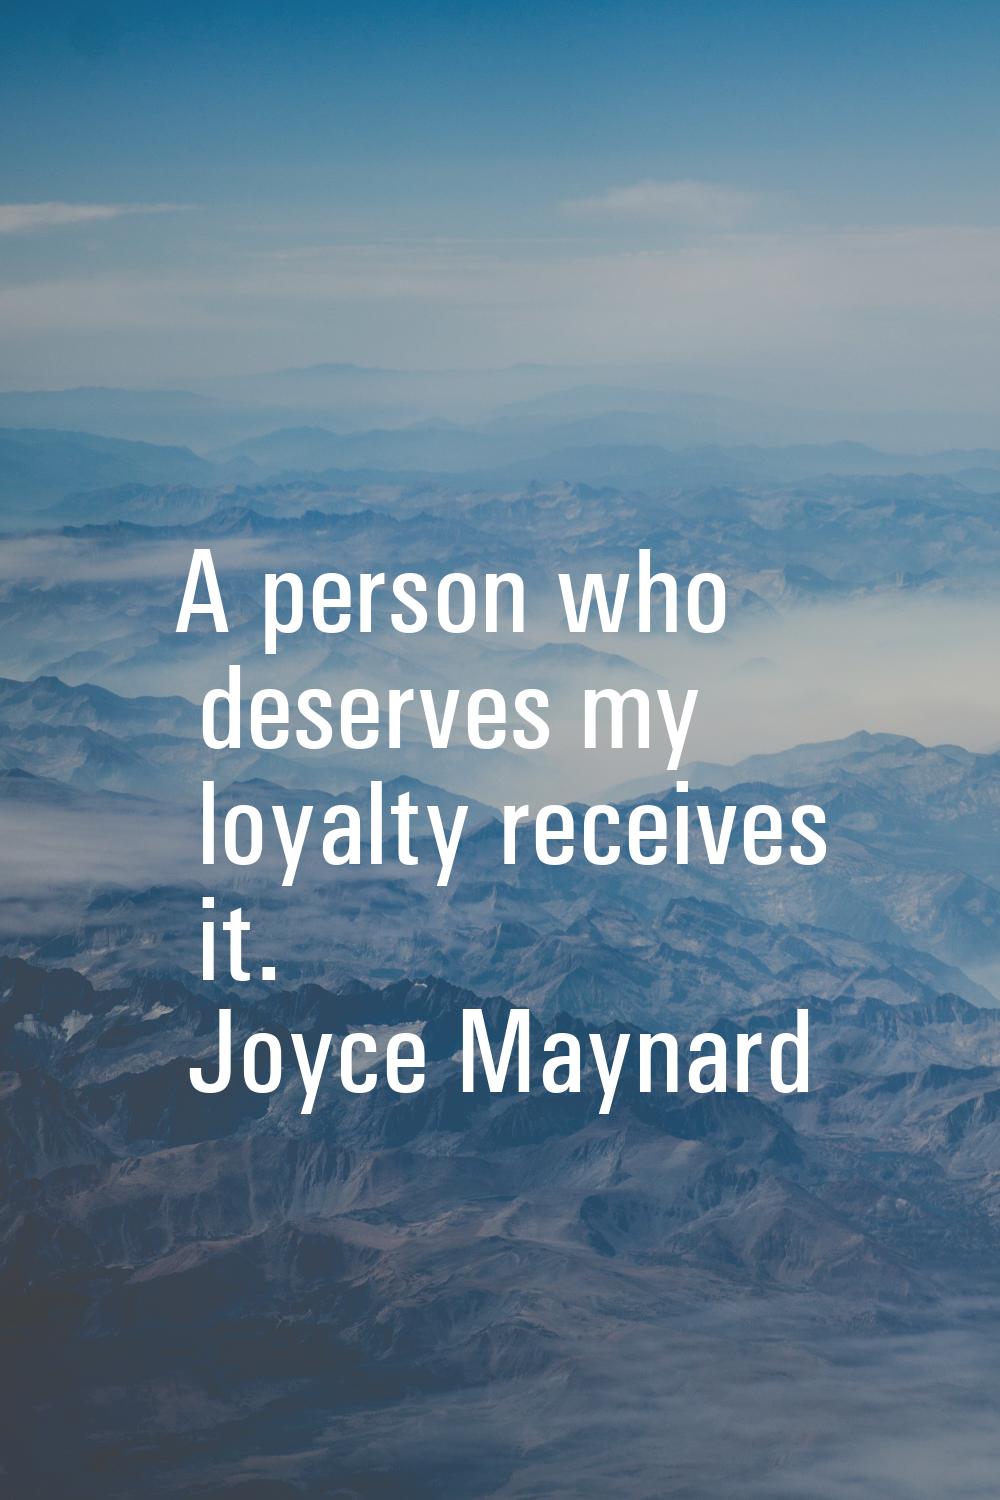 A person who deserves my loyalty receives it.